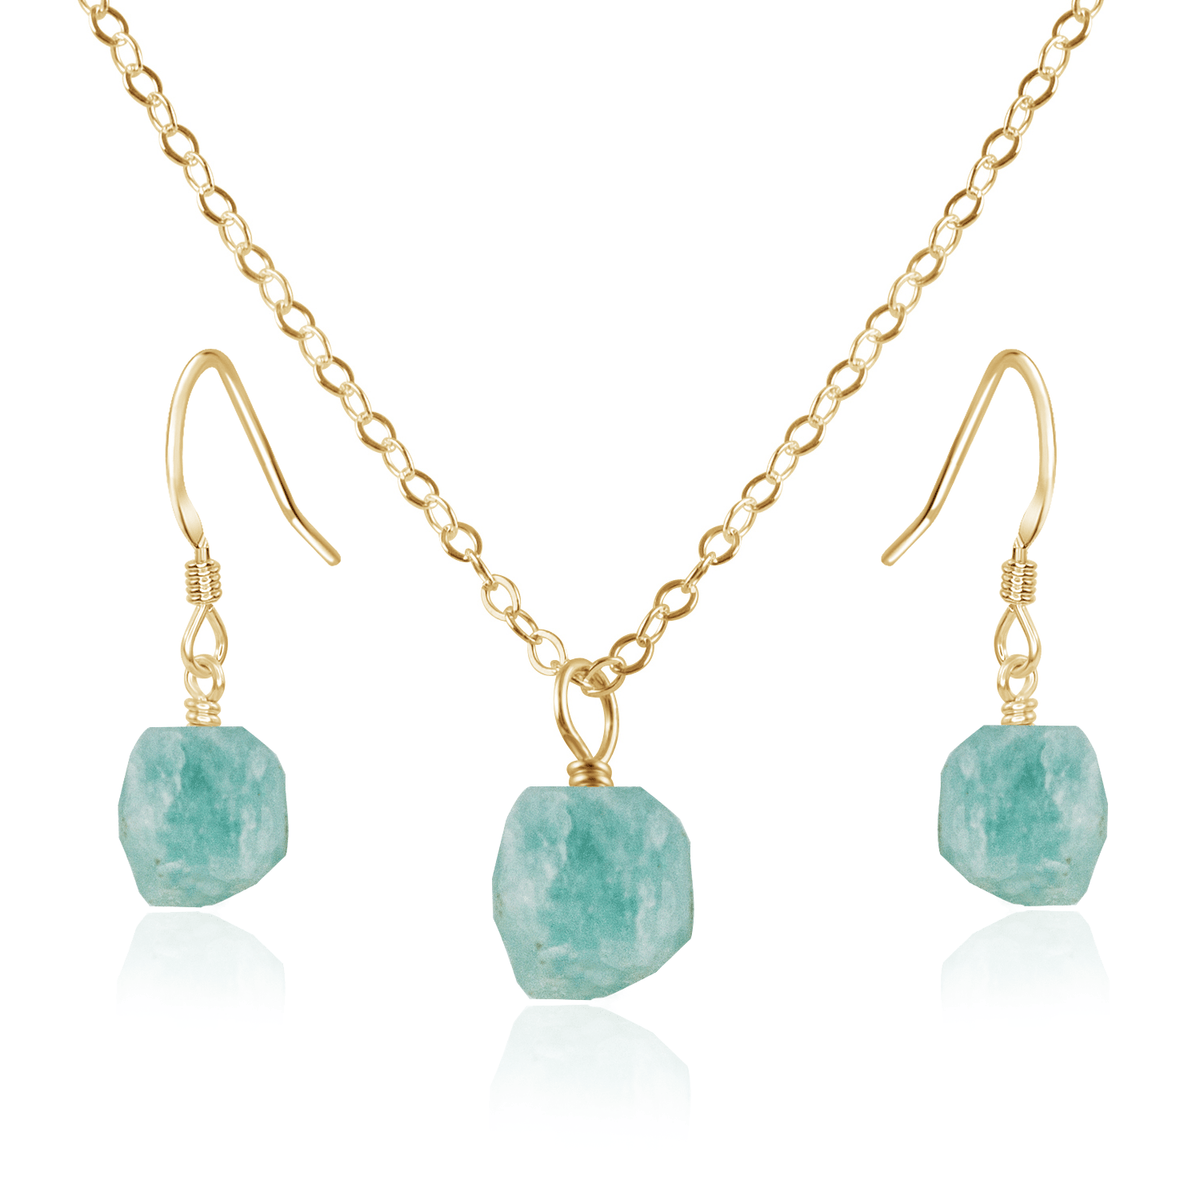 Raw Amazonite Crystal Earrings & Necklace Set - Raw Amazonite Crystal Earrings & Necklace Set - 14k Gold Fill / Cable - Luna Tide Handmade Crystal Jewellery